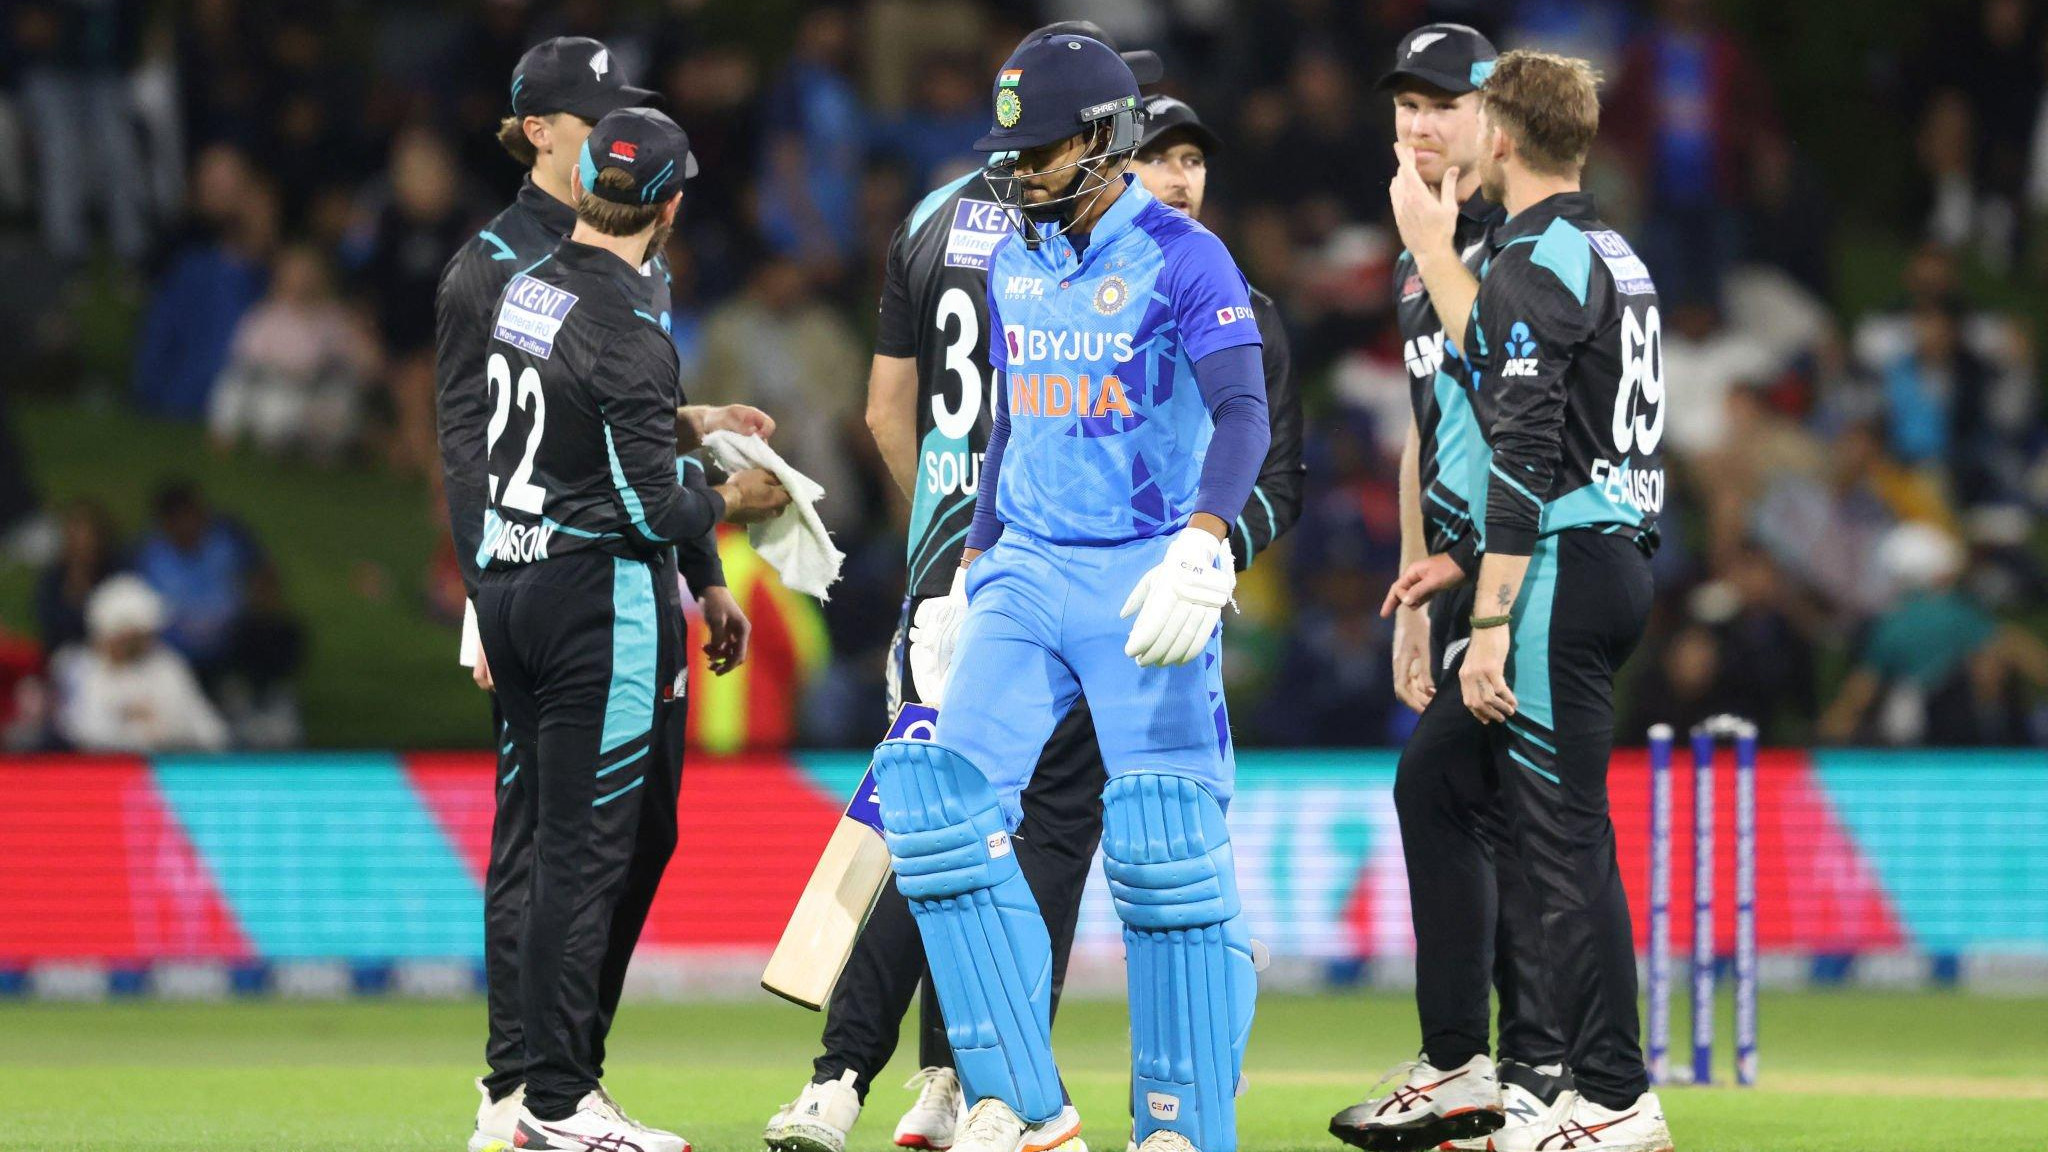 NZ v IND 2022: Meme fest explodes on Twitter as fans slams Shreyas Iyer after another failure in T20Is